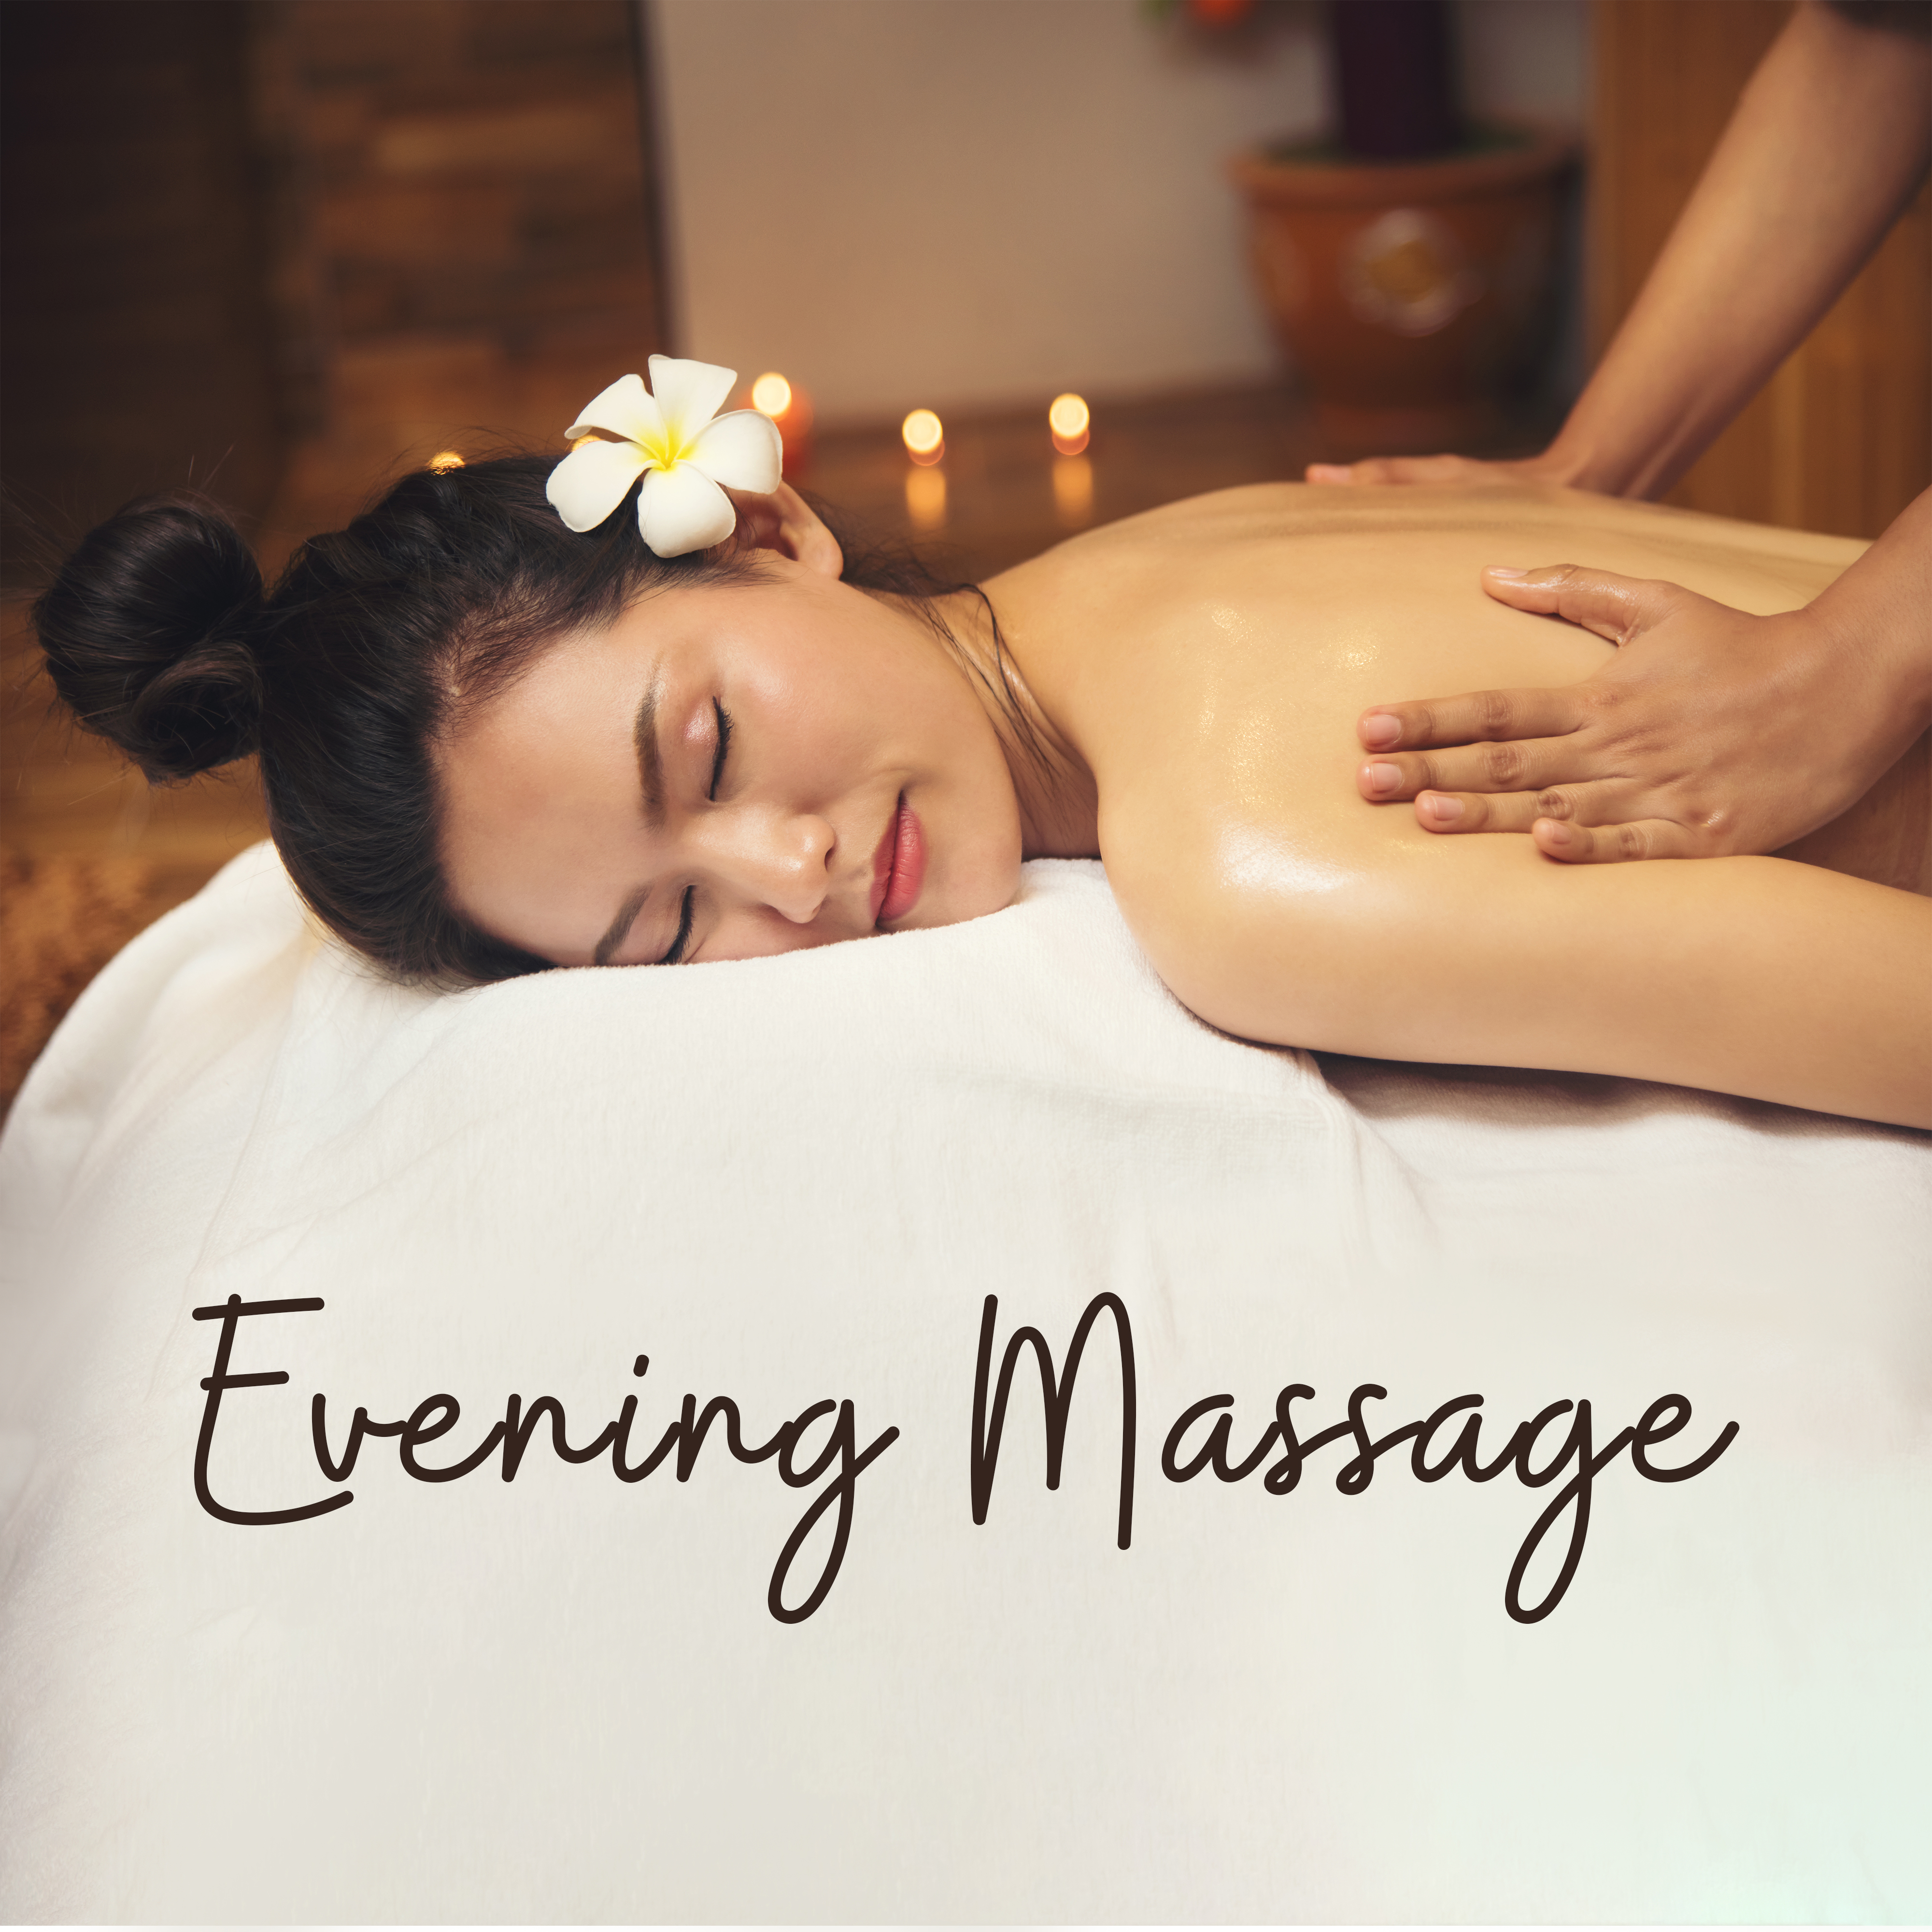 Evening Massage: Calming Music for Relaxation, Spa & Wellness Hotel Music, Helpful for Relaxation